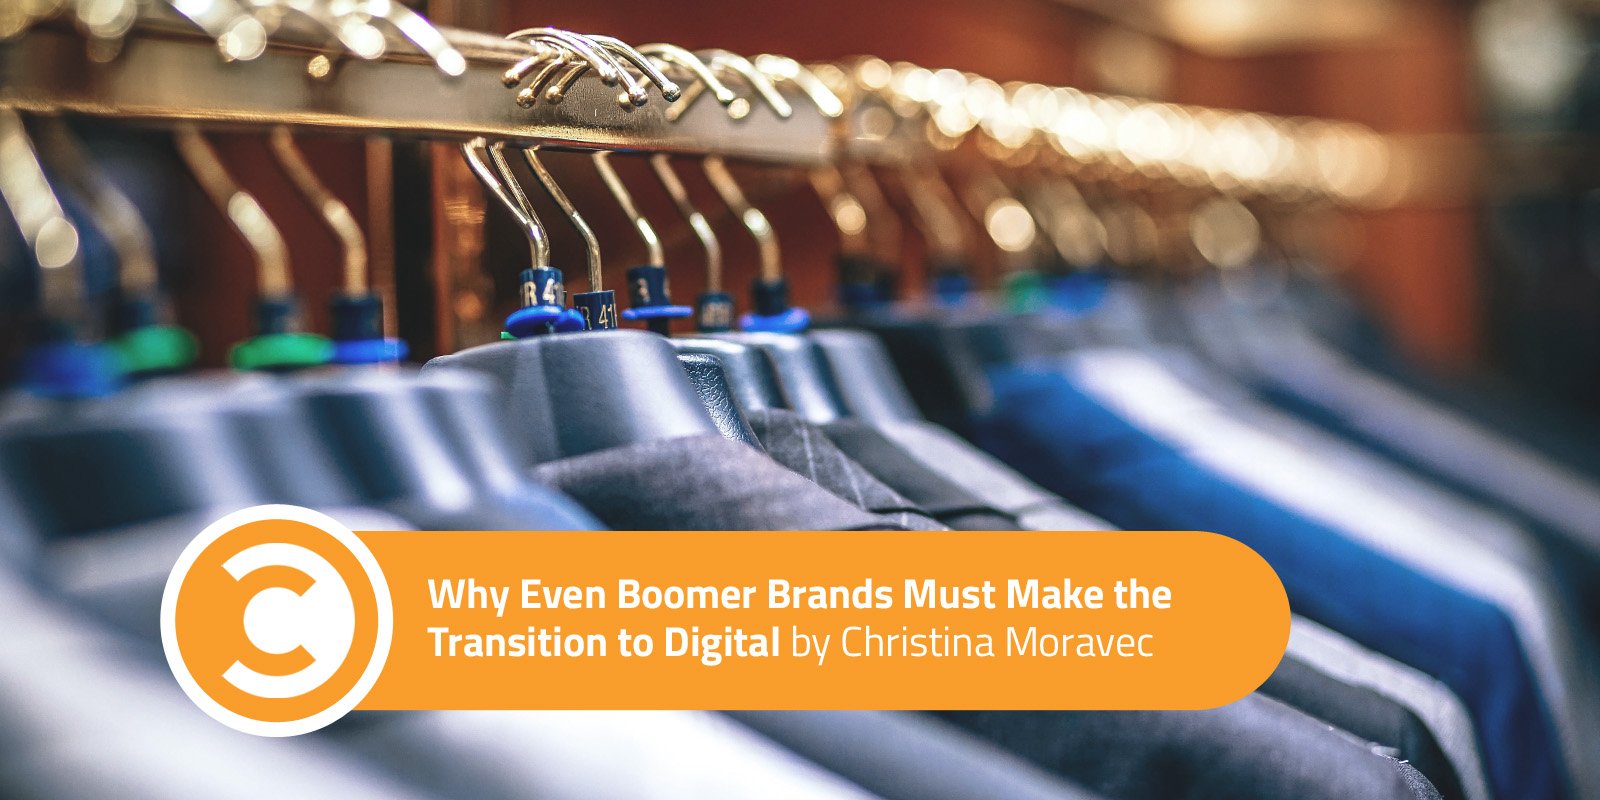 Why Even Boomer Brands Must Make the Transition to Digital